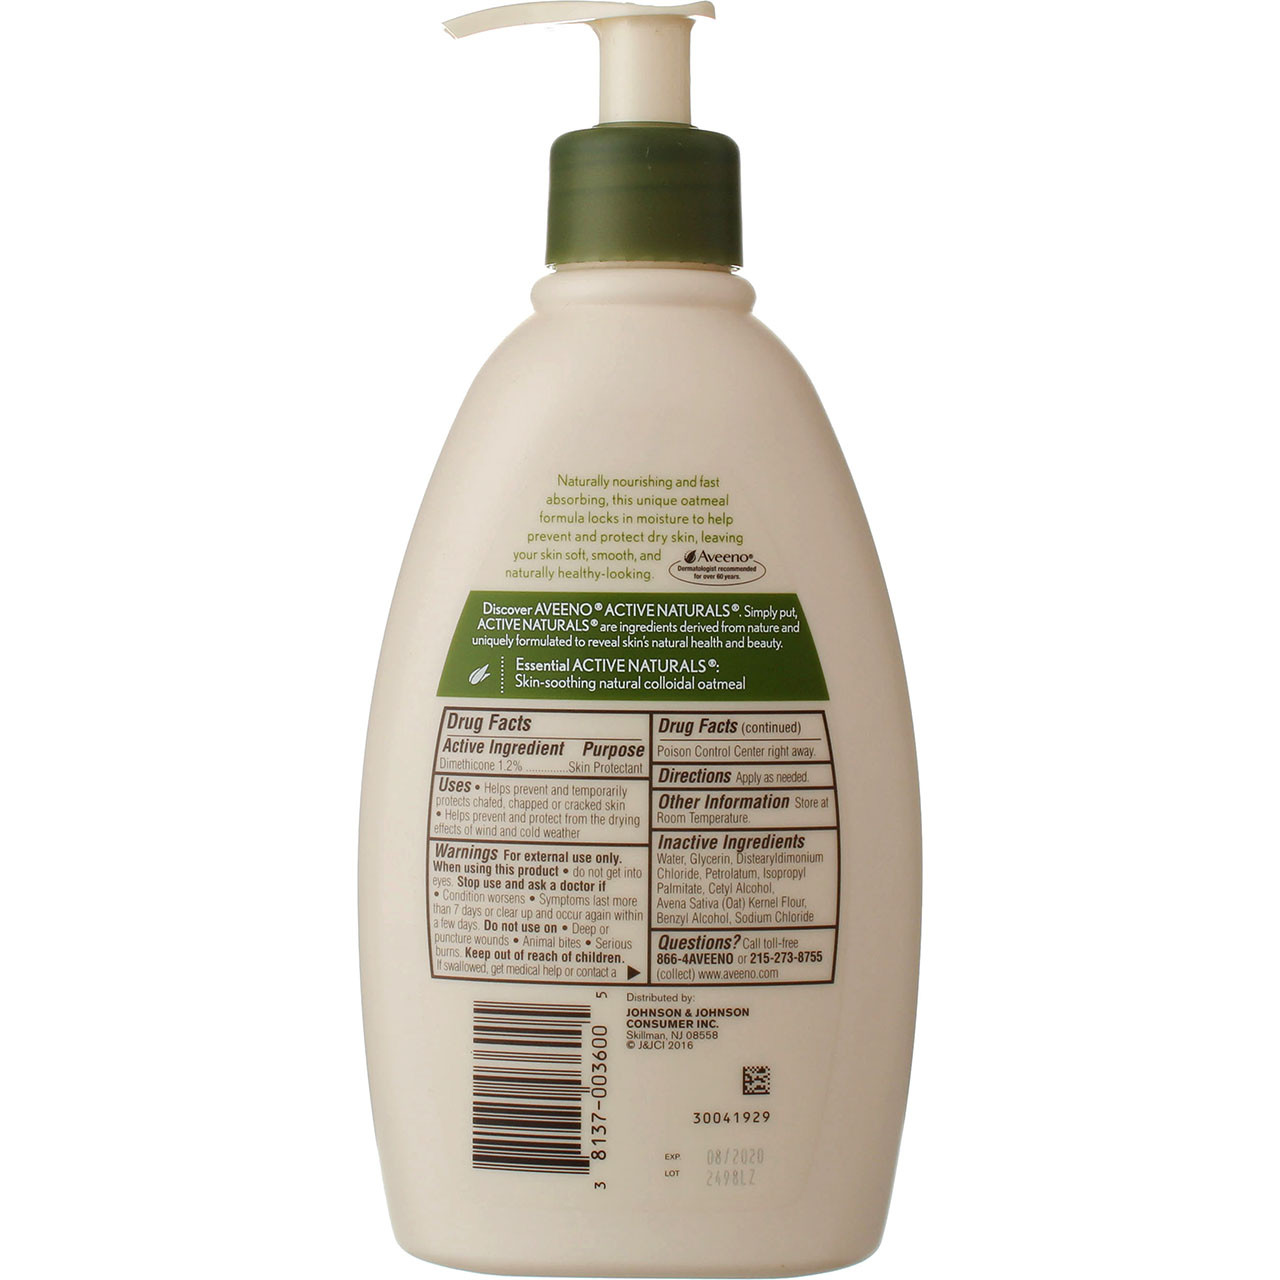 AVEENO Active Naturals Daily Moisturizing Lotion, Fragrance Free 12 oz (Pack of 2) - image 2 of 6